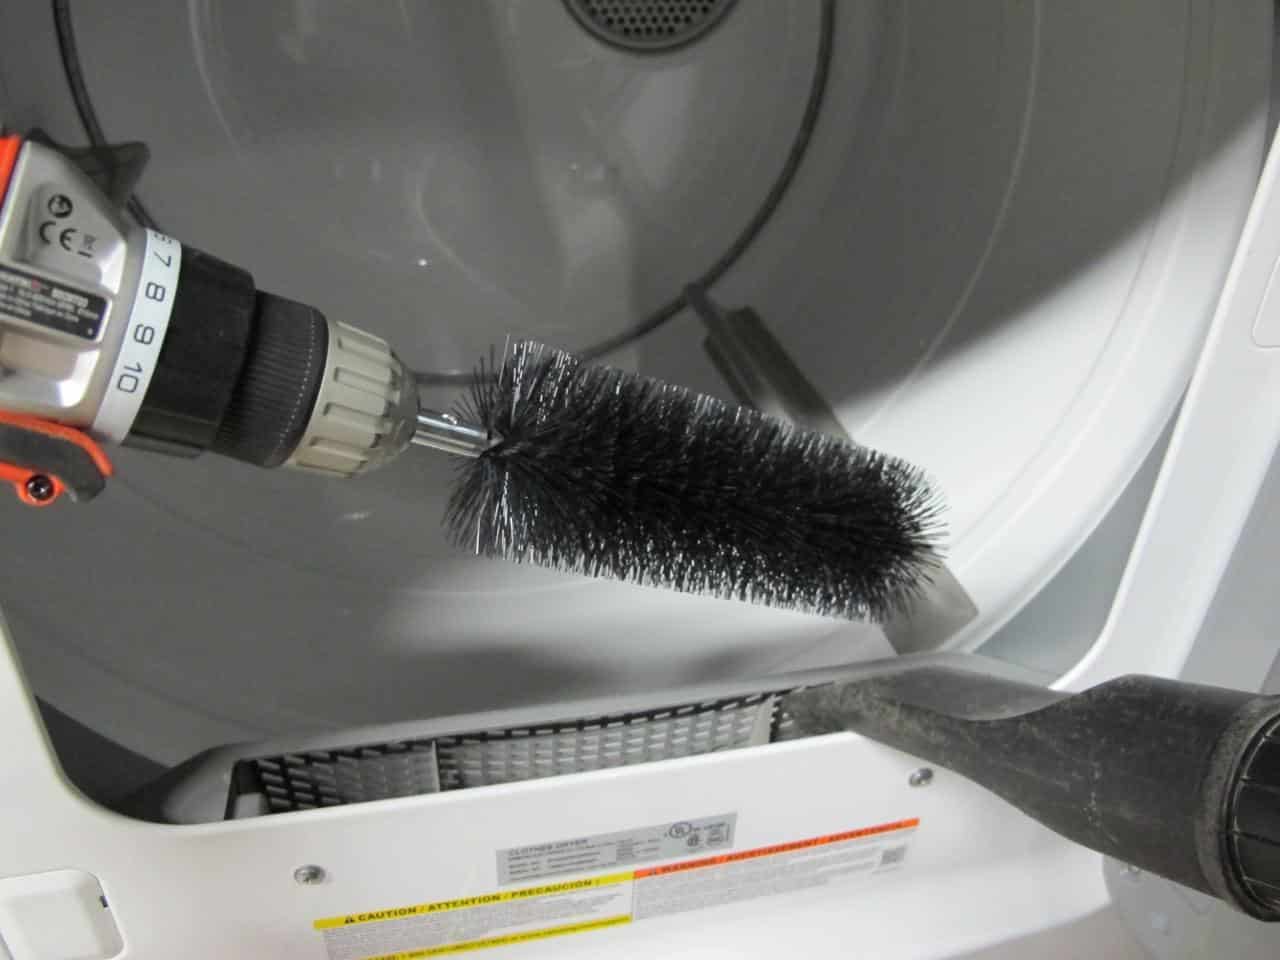 How to Clean Up Dryer Machine